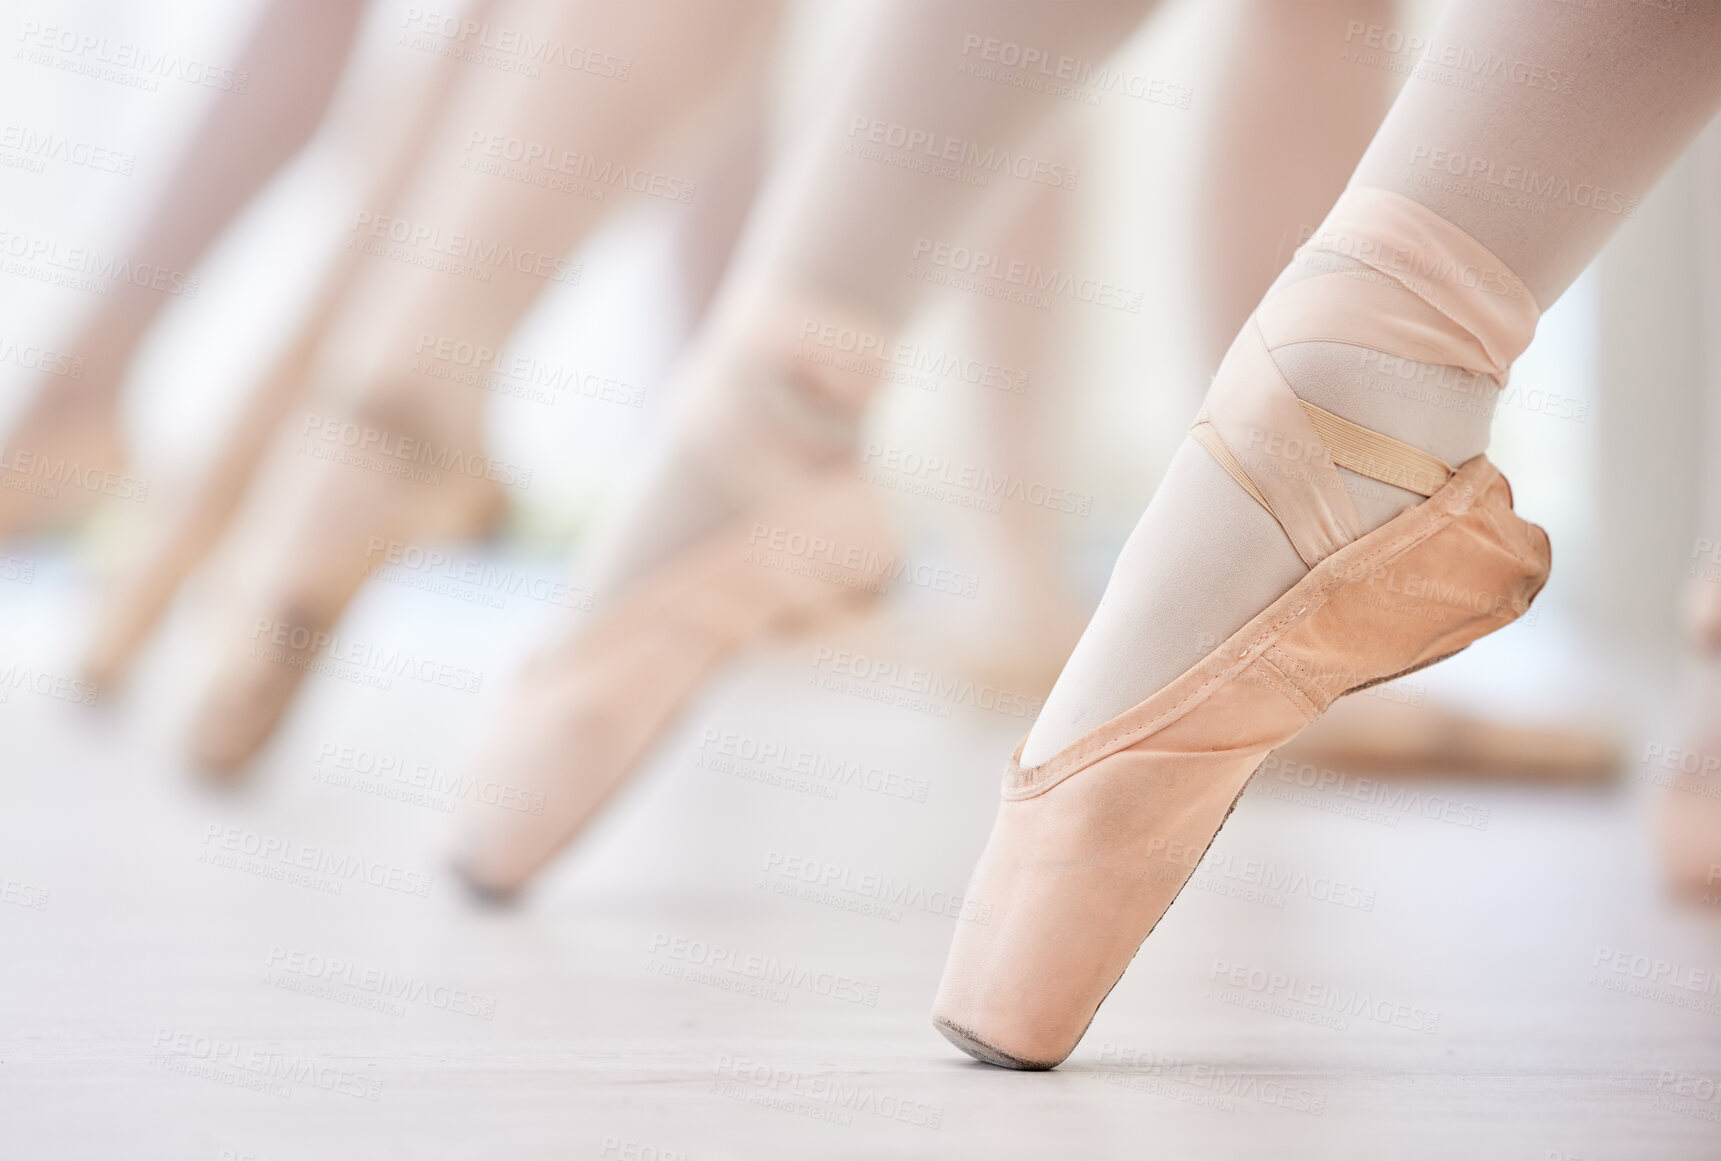 Buy stock photo Shot of a group of ballerina's with toes pointed